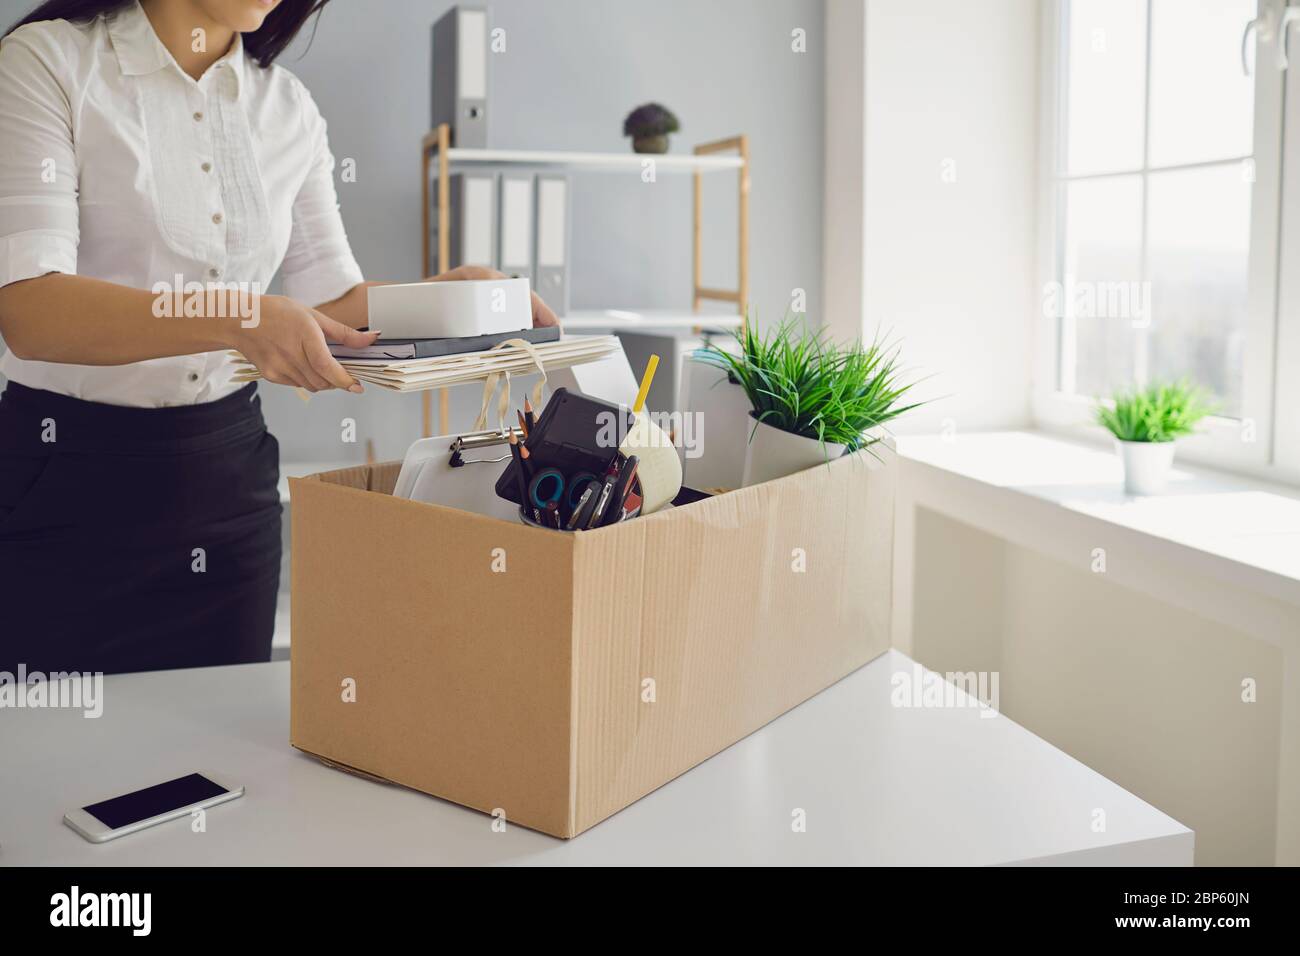 Unemployment Dismissed business woman upset with a cardboard box leaves the workplace from the office of the company. Stock Photo